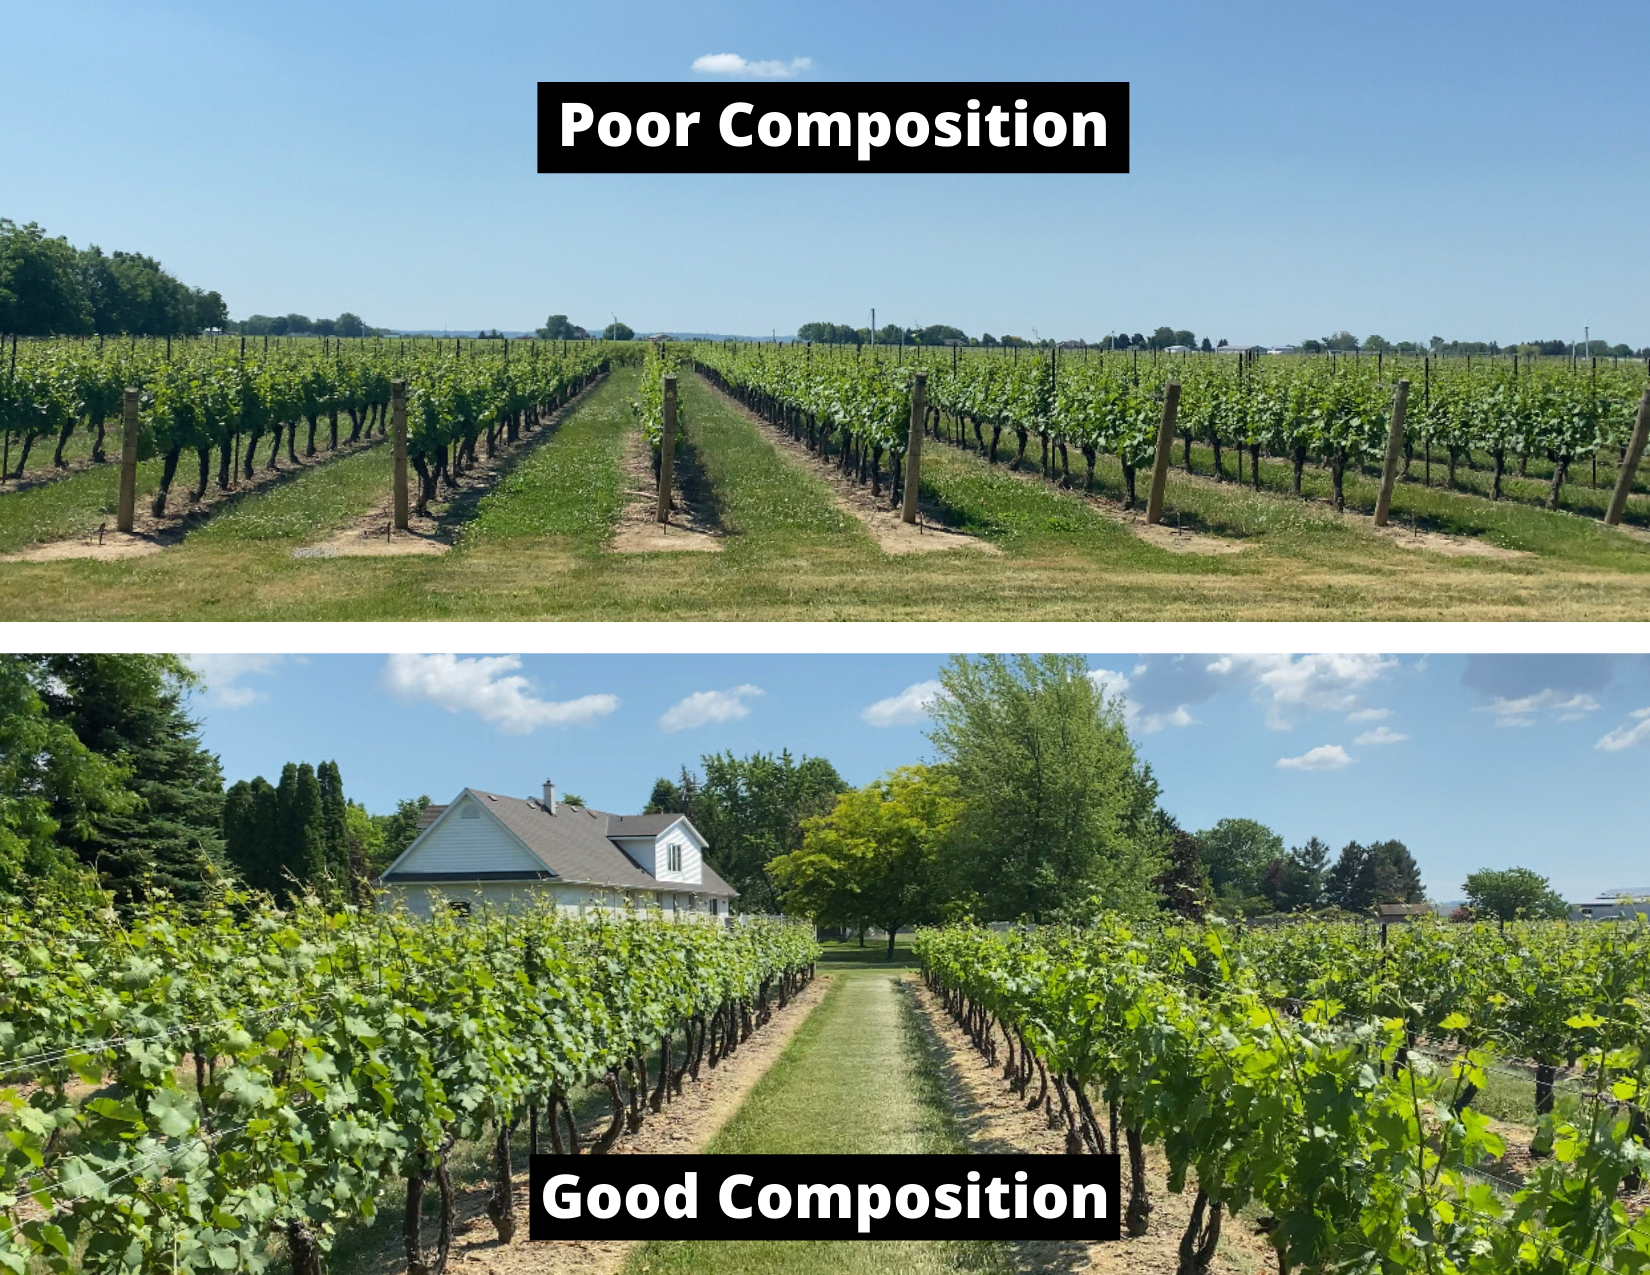 Two pictures of a vineyard. This is a poor vs good composition example.